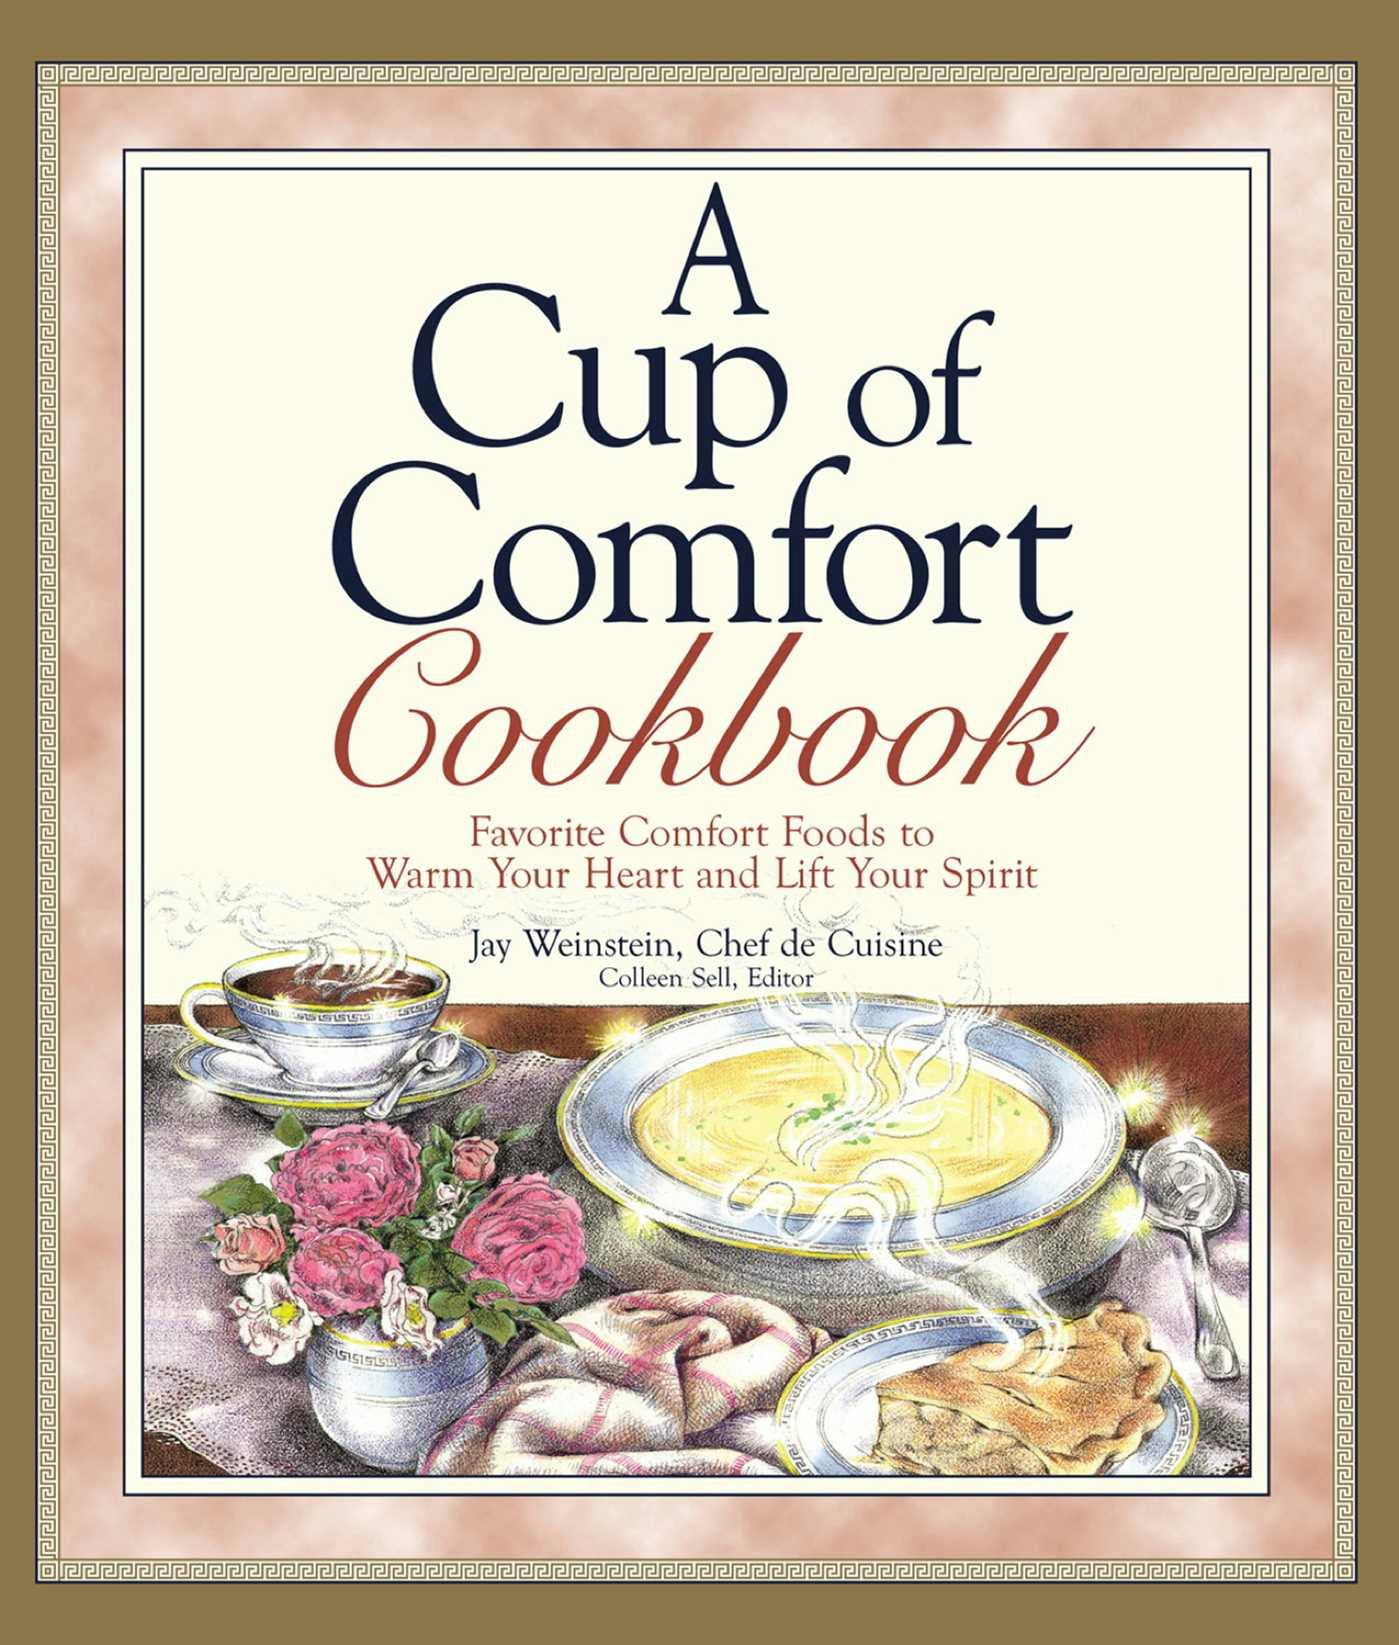 A Cup of Comfort Cookbook: Favorite Comfort Foods to Warm Your Heart and Lift Your Spirit - undefined